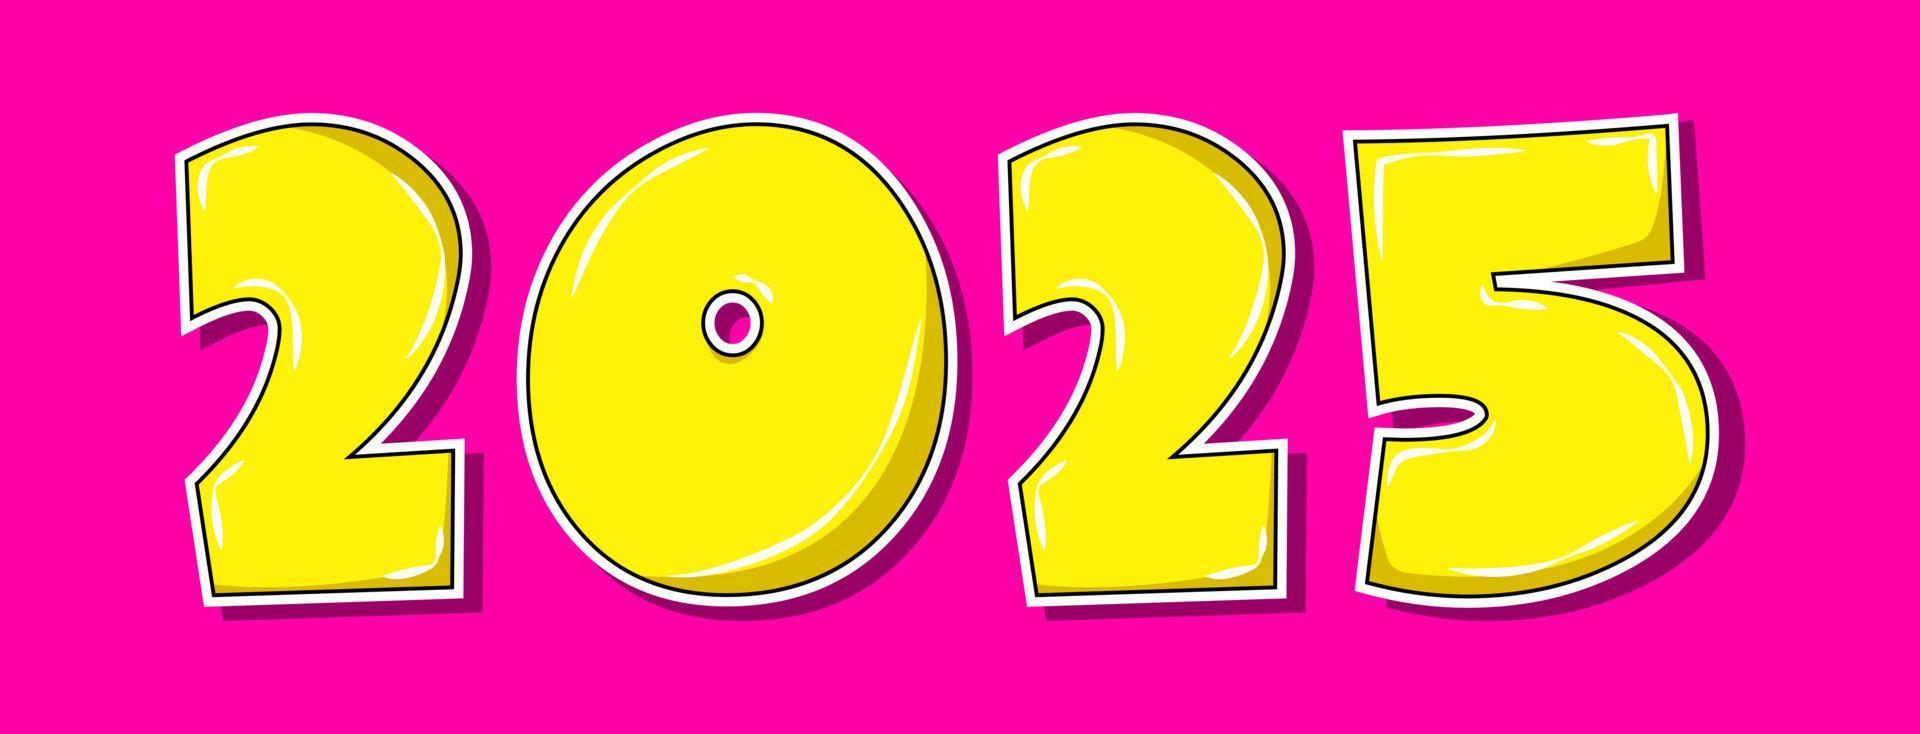 Pop art style yellow 2025 year on pink background vector